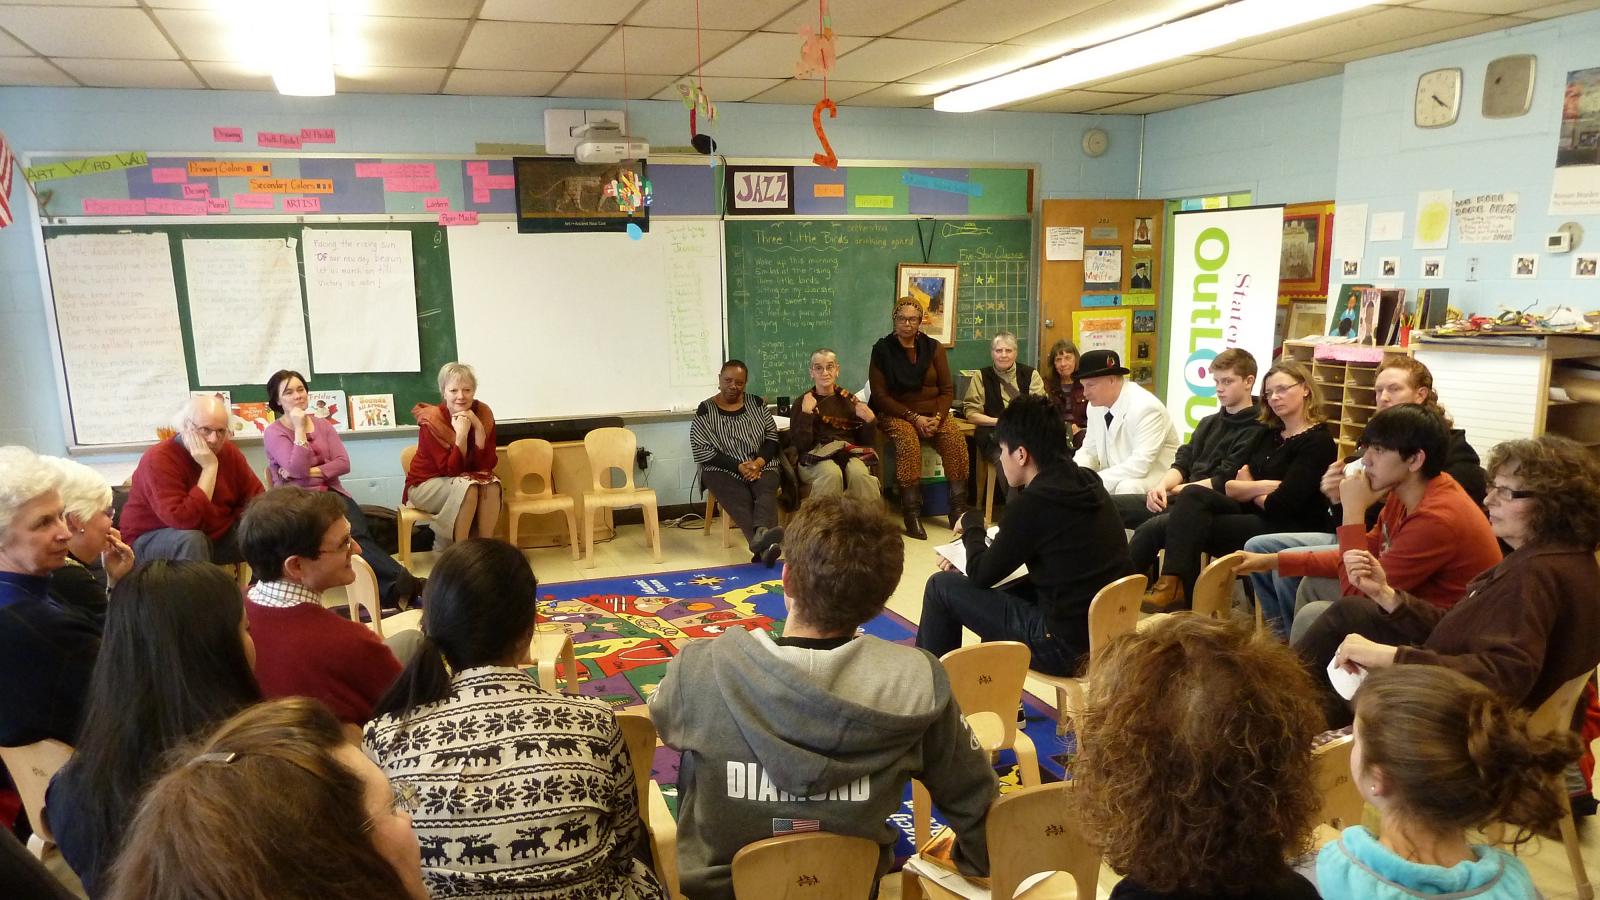 A group of people of diverse ages sit around a classroom discussing a book.